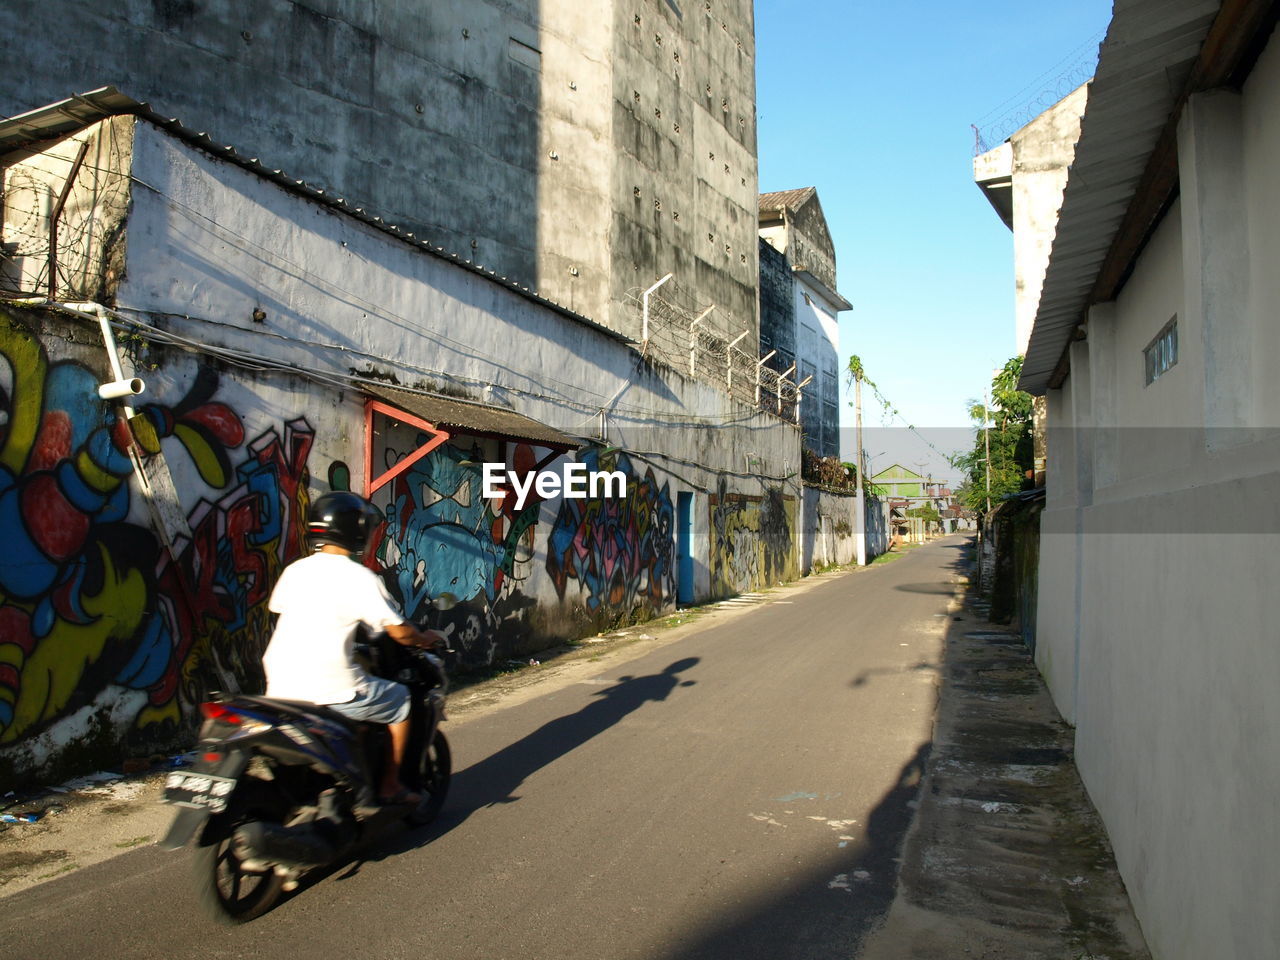 Rear view of man riding motorcycle on street by graffiti wall